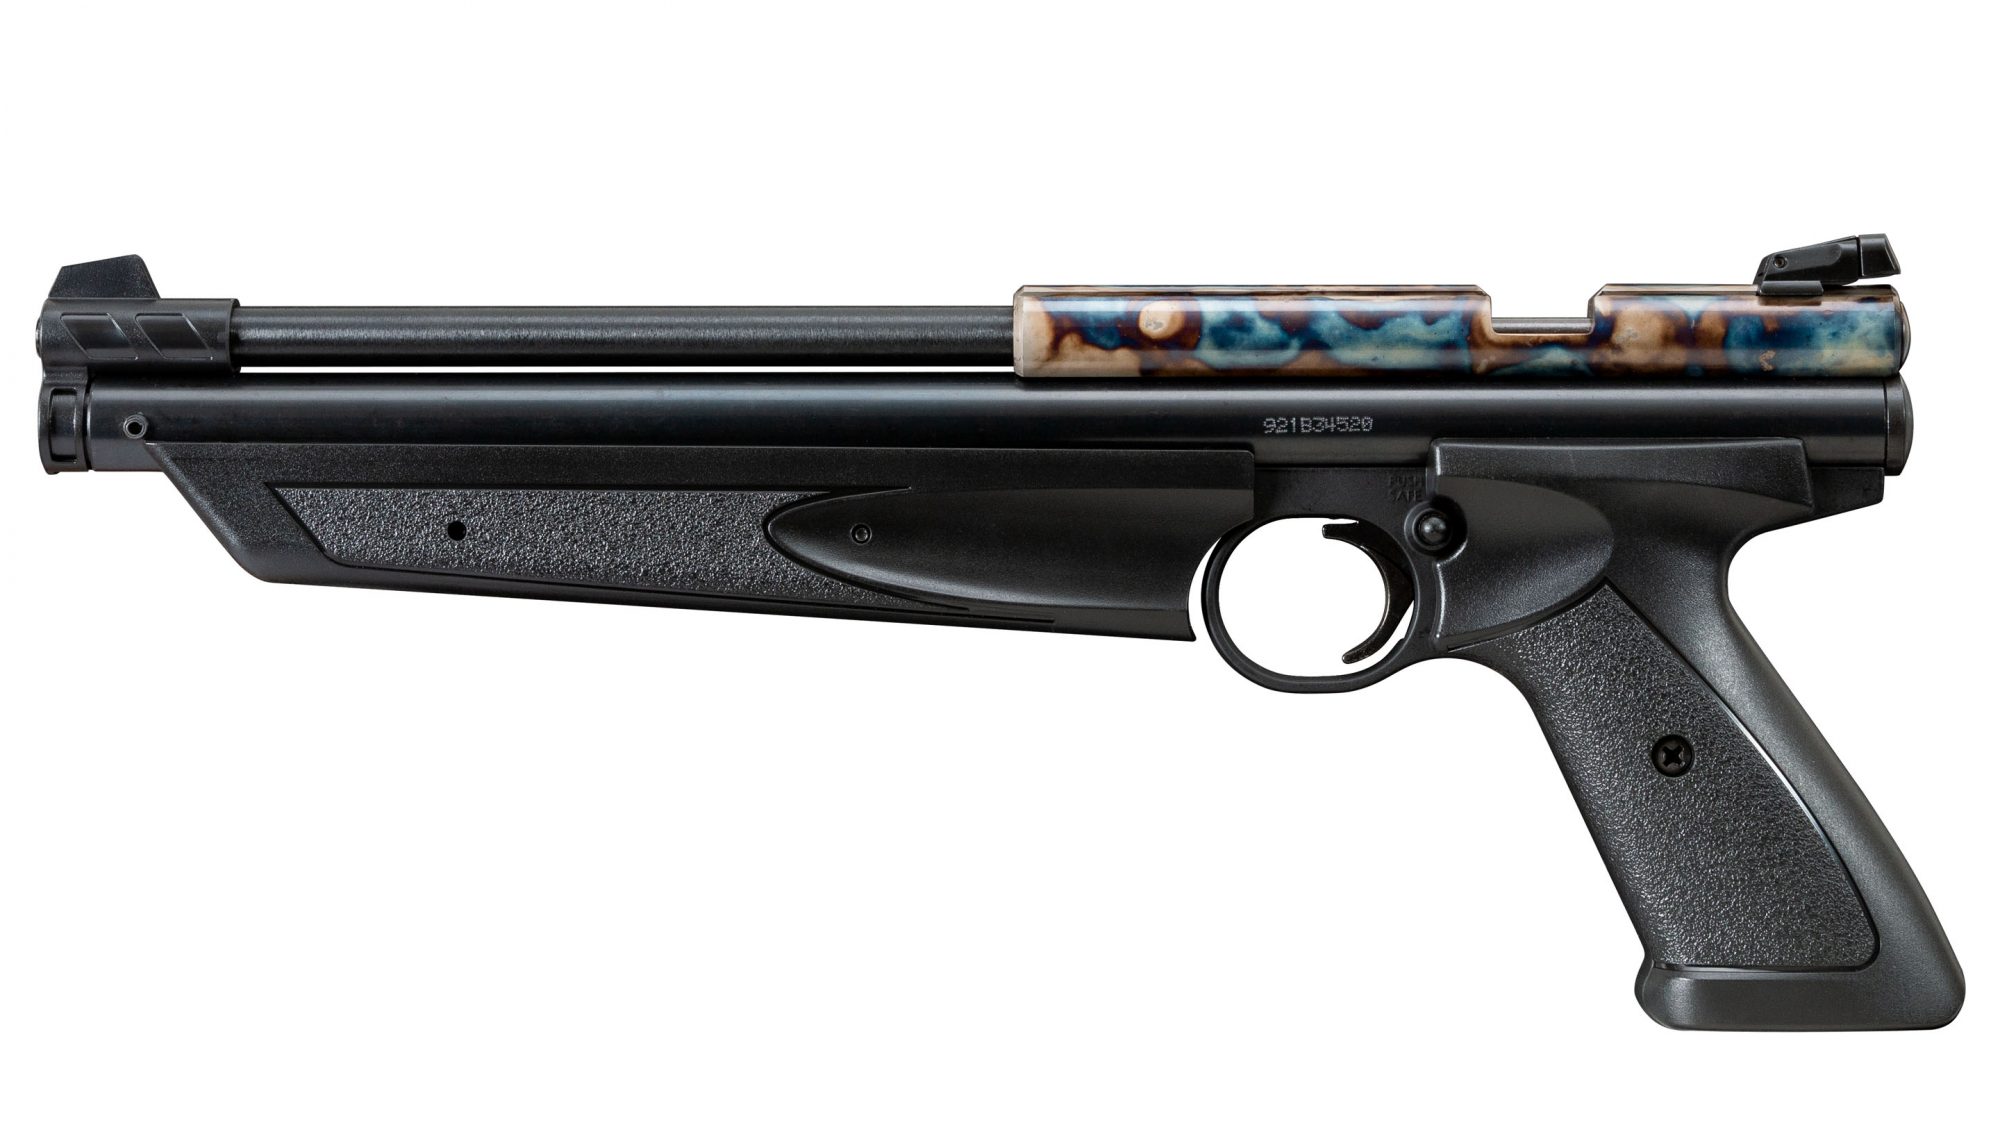 Photo of a color case hardened Crosman American Classic .22 air pistol, featuring bone charcoal color case hardening by Turnbull Restoration of Bloomfield, NY